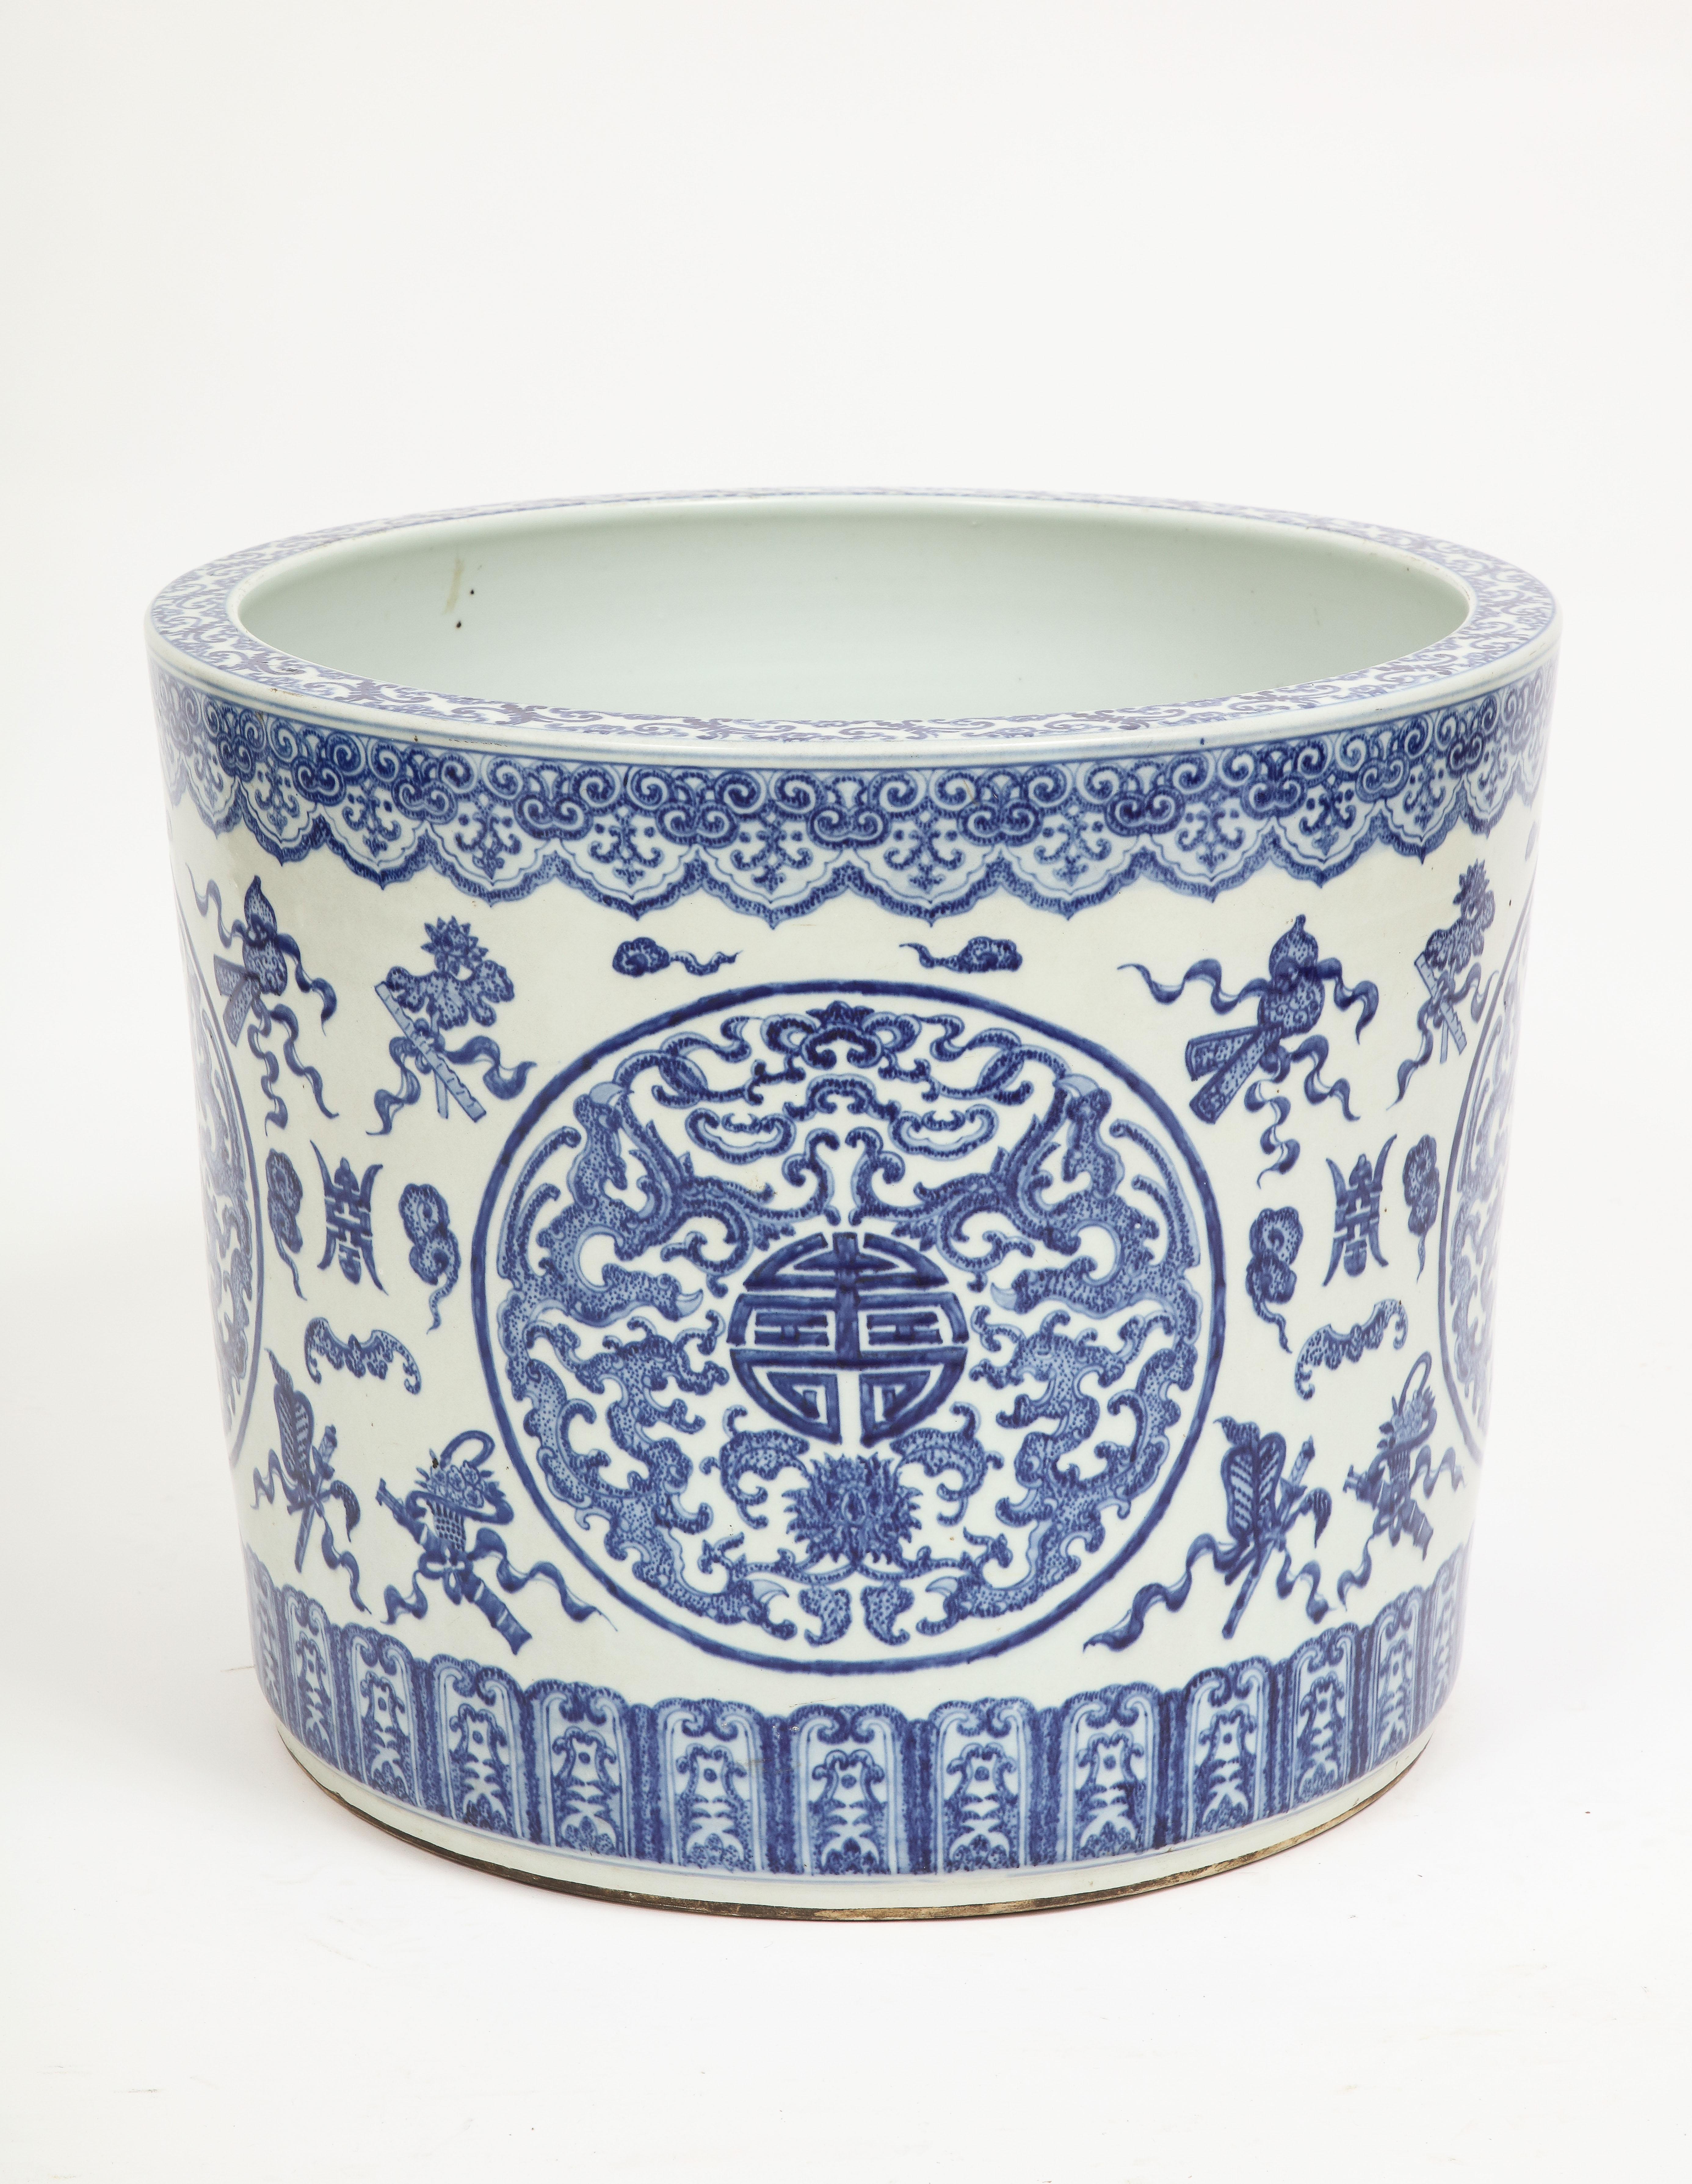 A Large 19th Century Chinese blue and white porcelain fishbowl/planter with Chinese Emblems and Designs. This piece is large and cylindrical in form with hand-painted blue over white designs of Chinese characters, emblems and upper and lower border